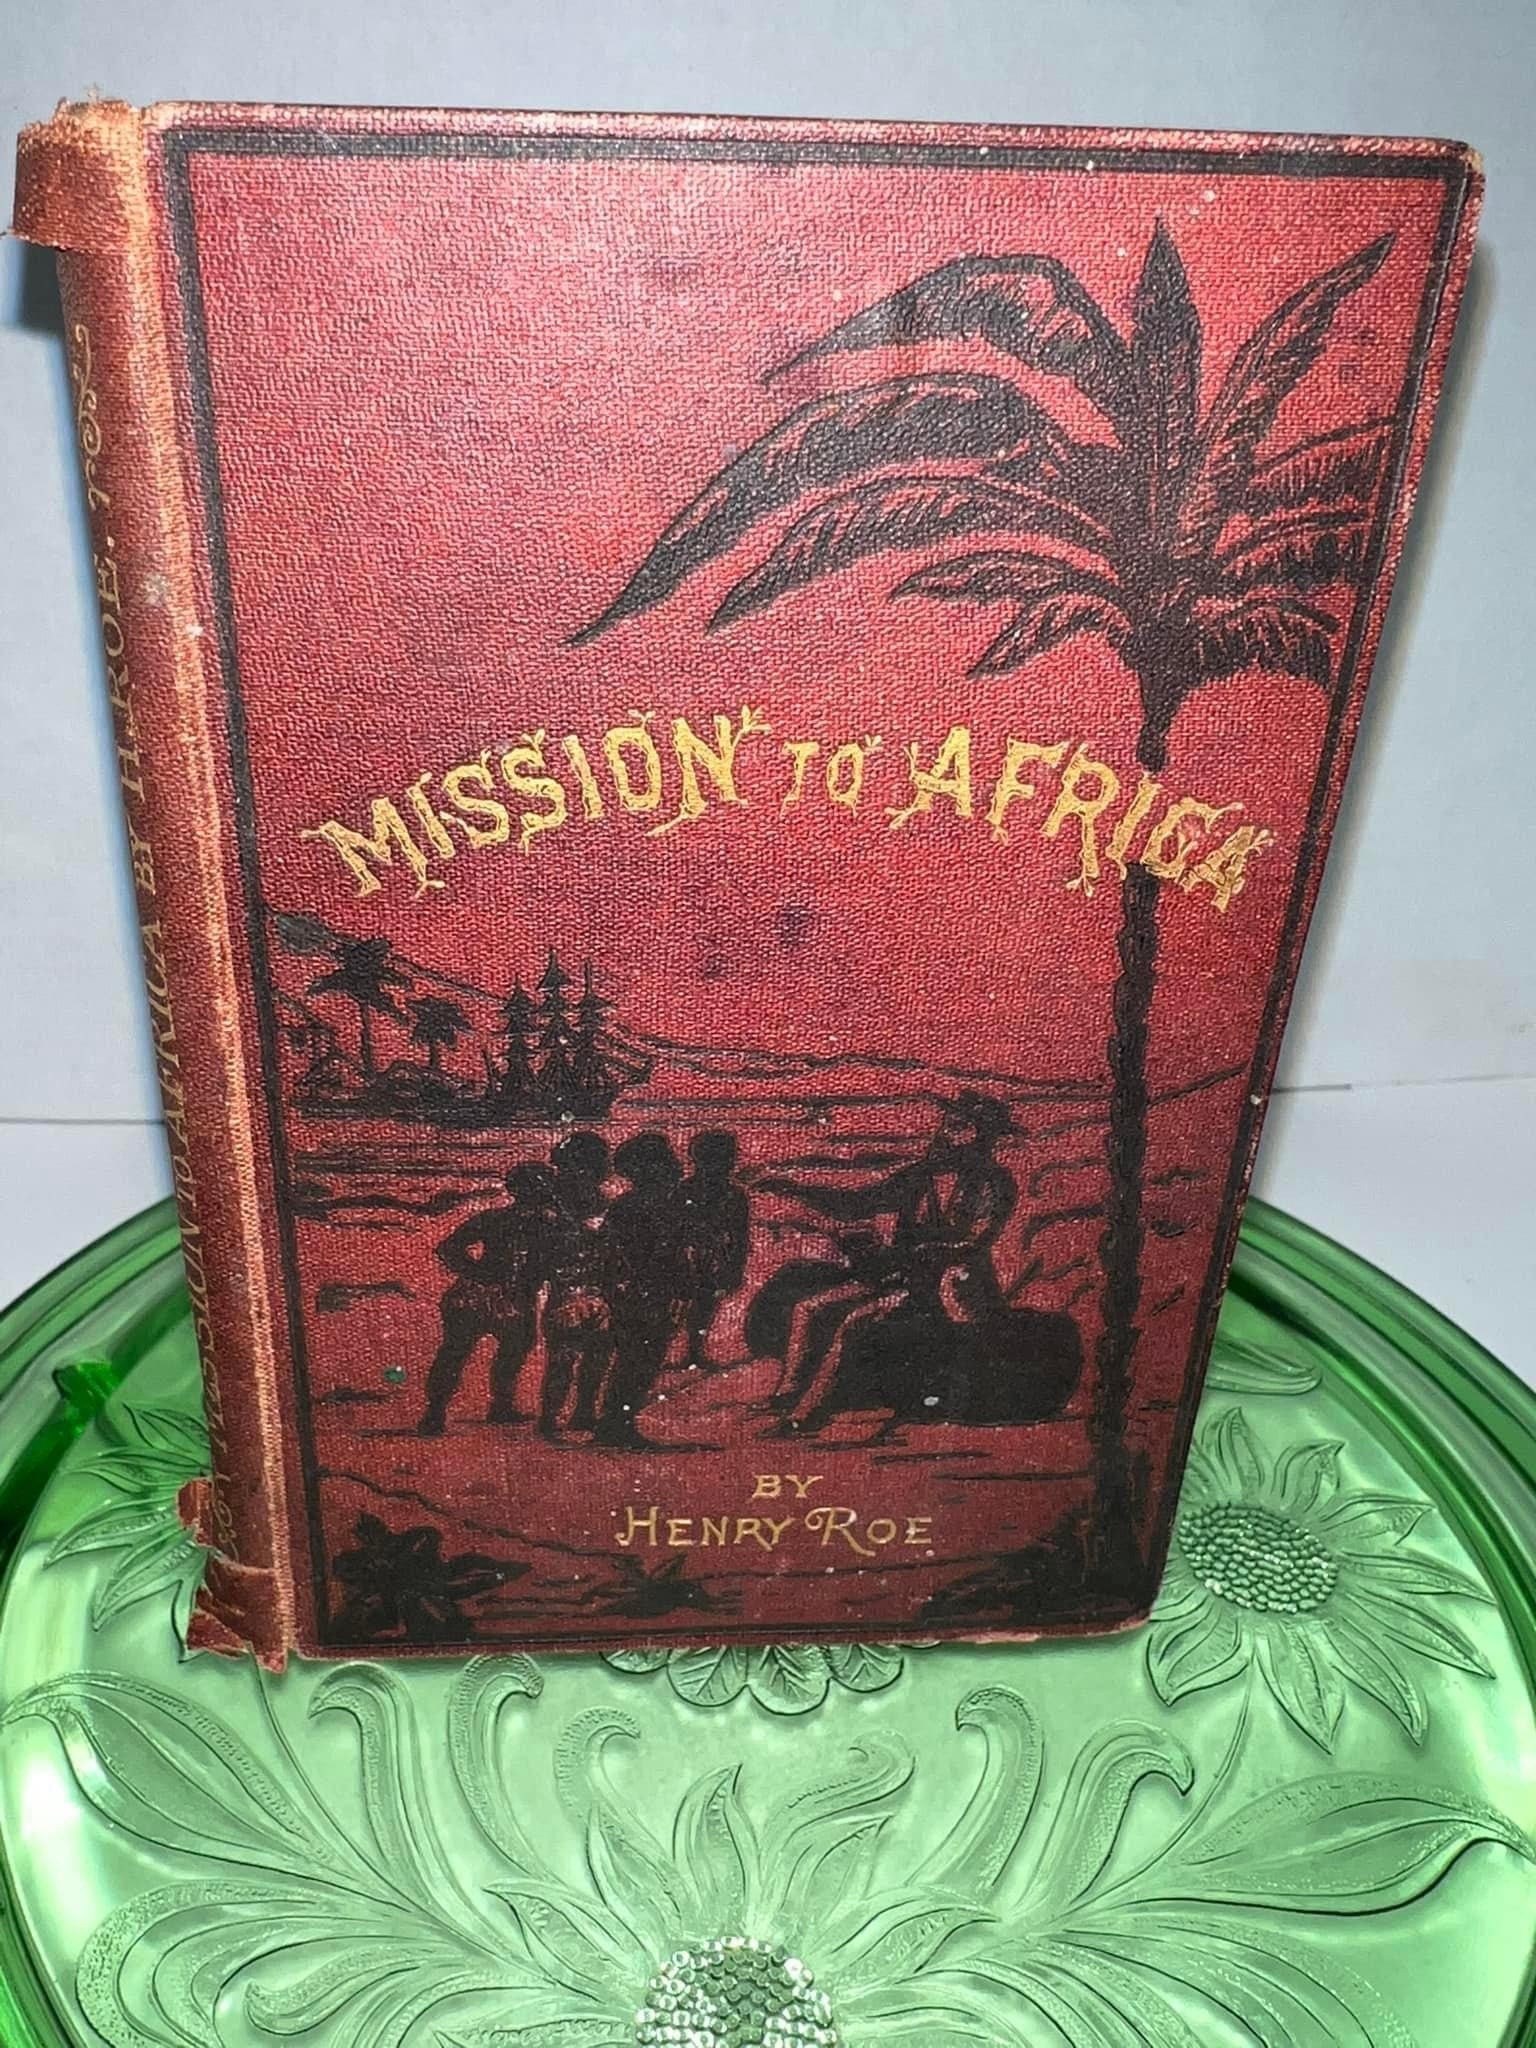 Antique history exploration Mission to Africa 1872 Henry roe scarce author signed ??